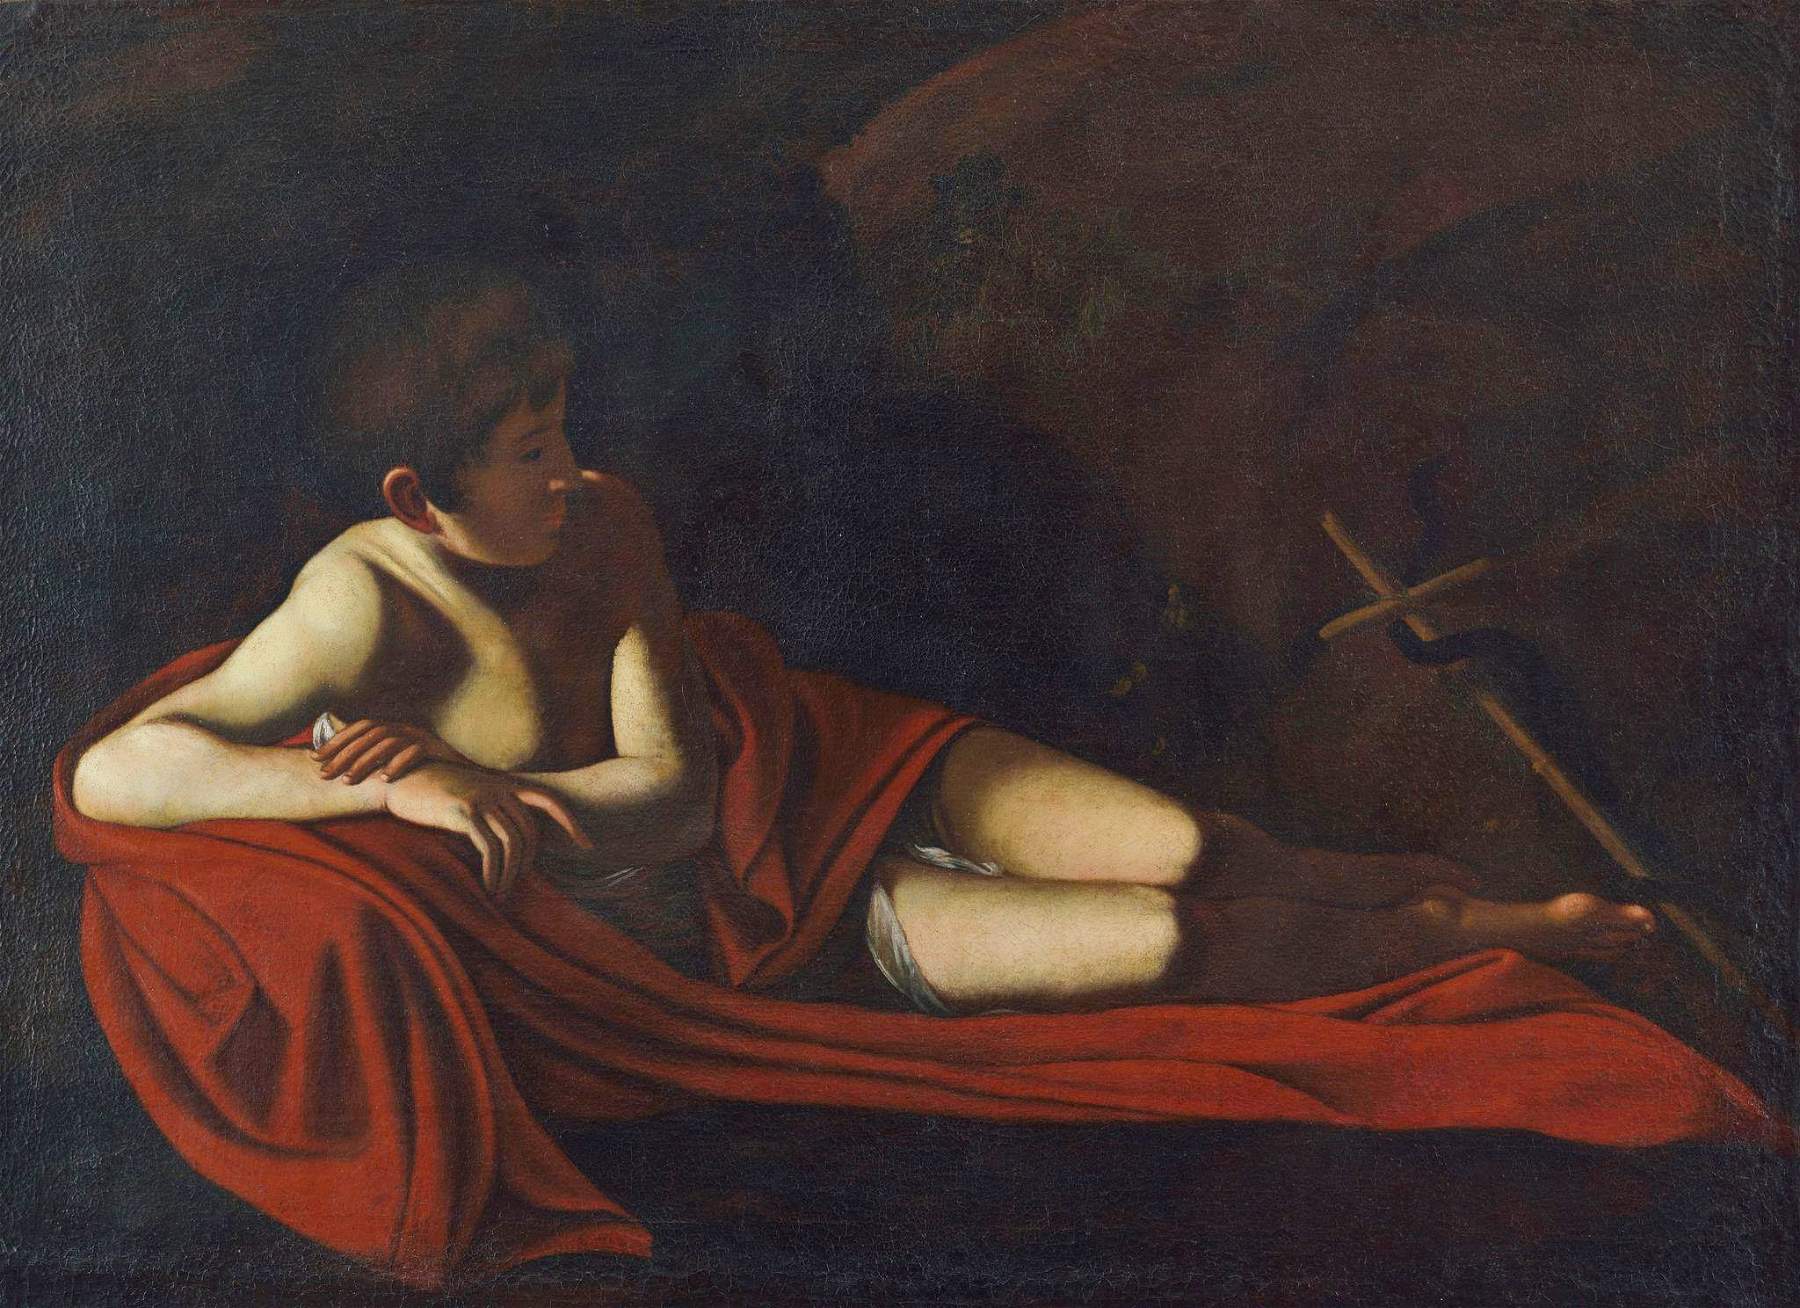 St. John attributed to Caravaggio returns to exhibition: it's in Alba